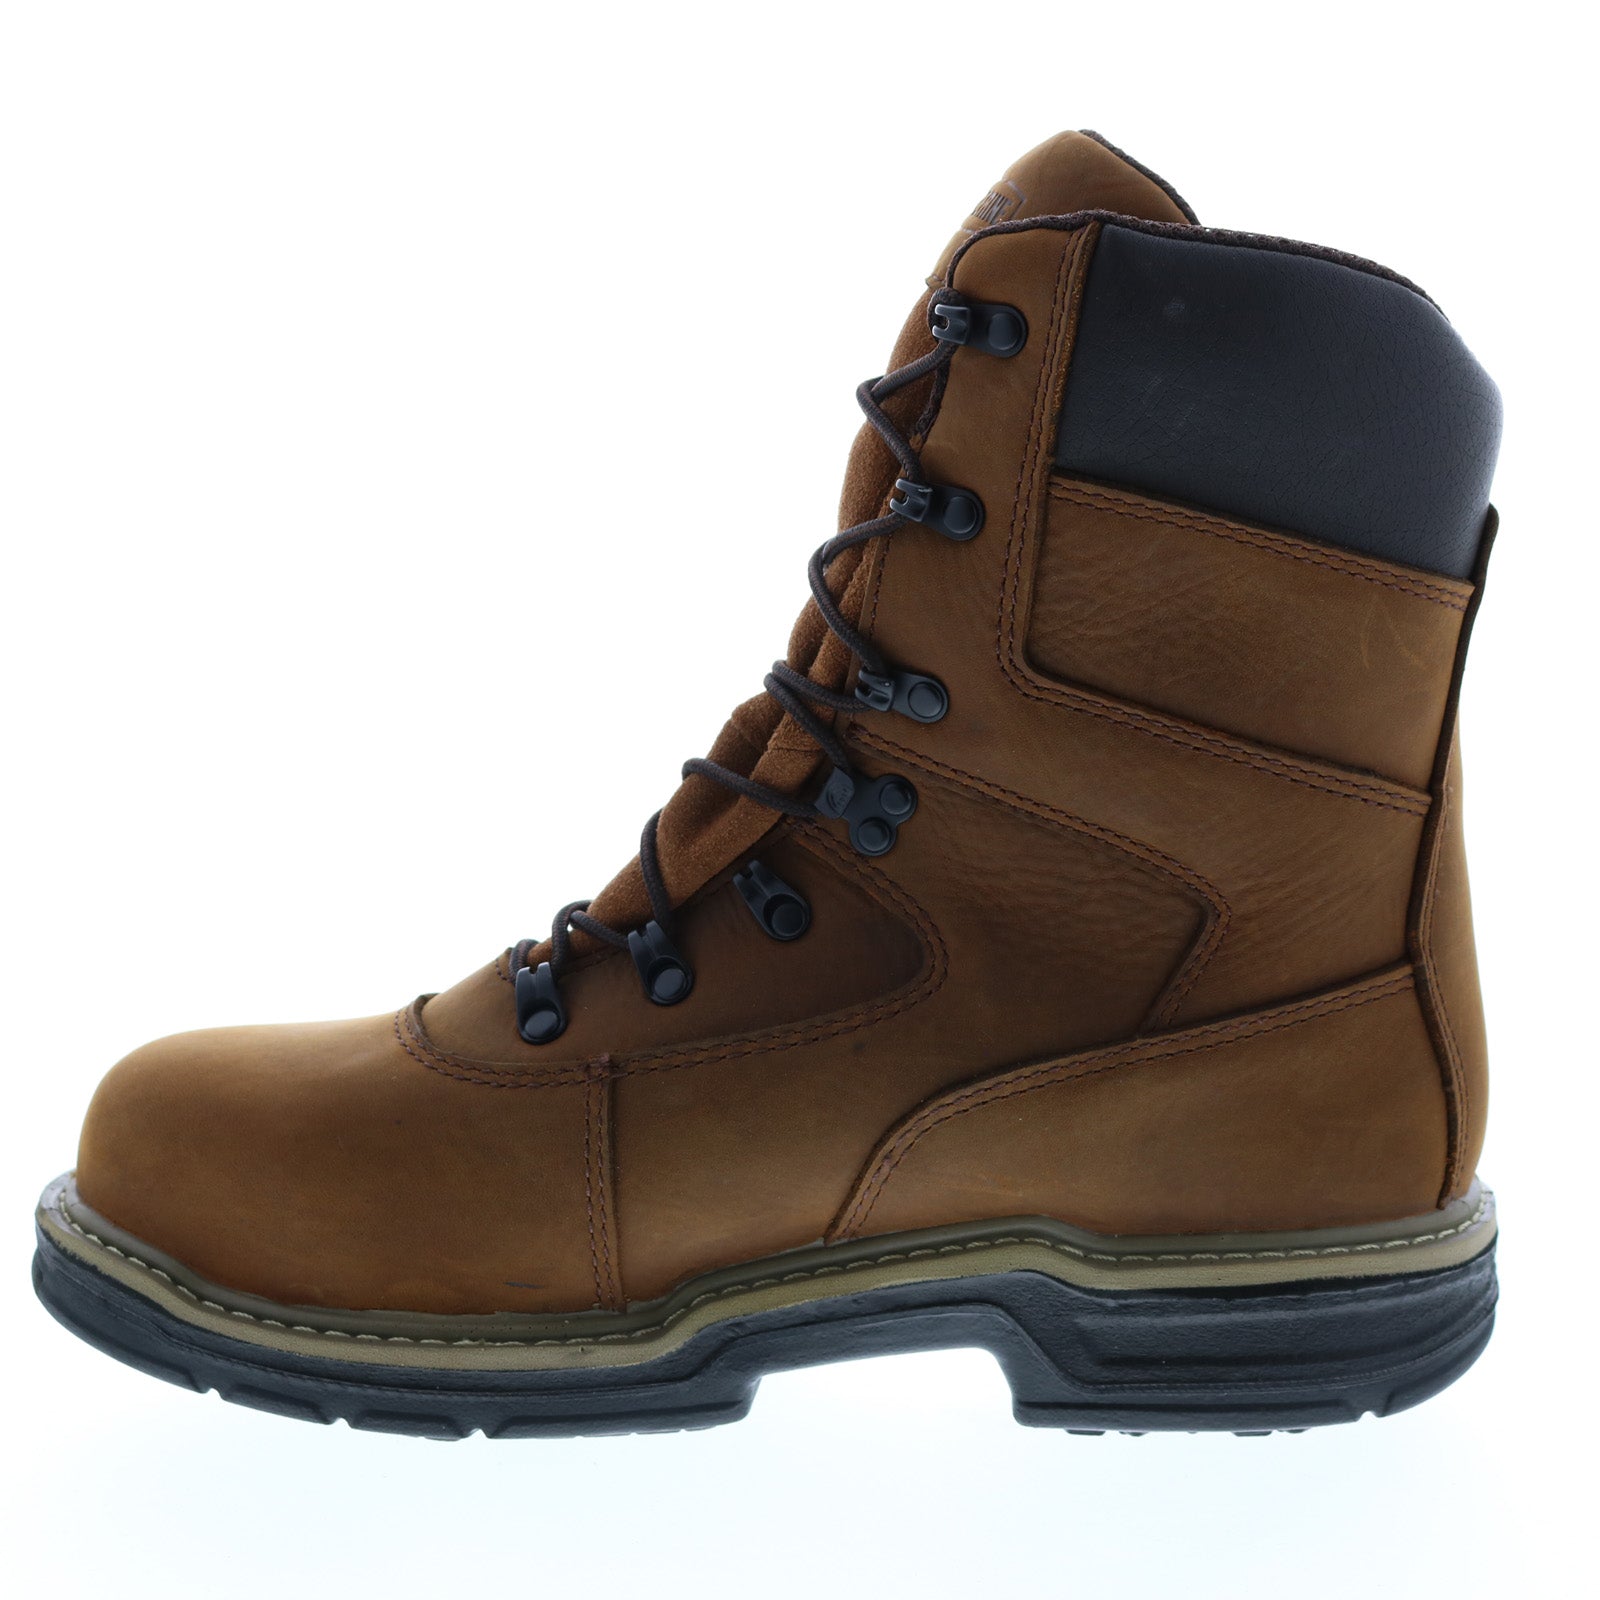 Wolverine Marauder 8 W02163 Mens Brown Extra Wide Leather Work Boots ...